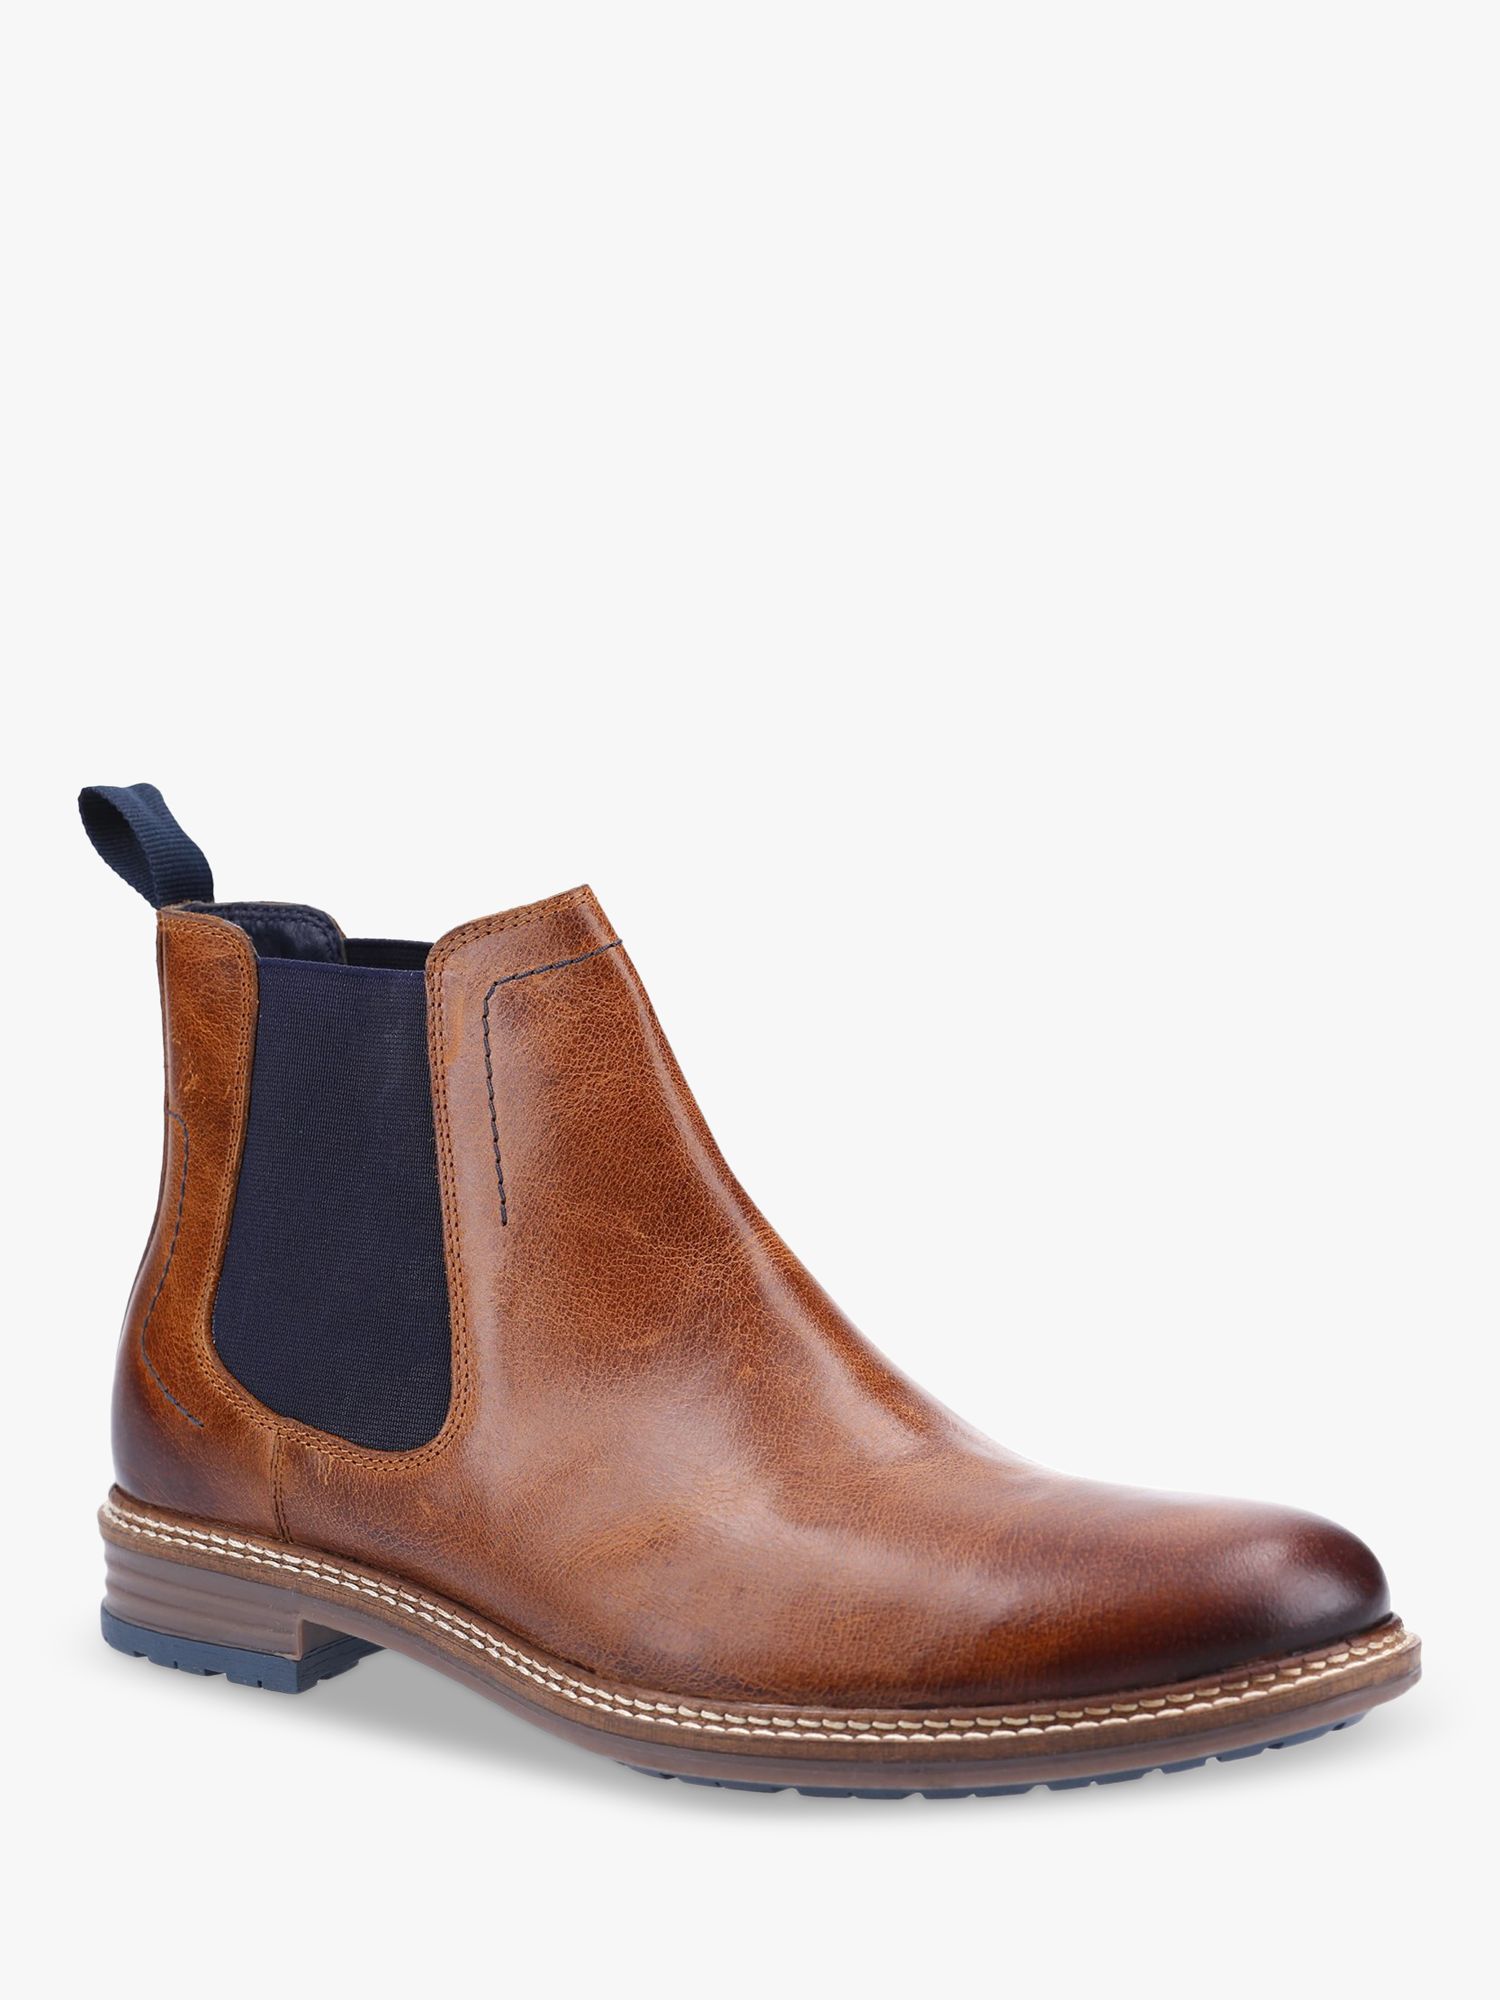 Buy Hush Puppies Justin Chelsea Boots Online at johnlewis.com